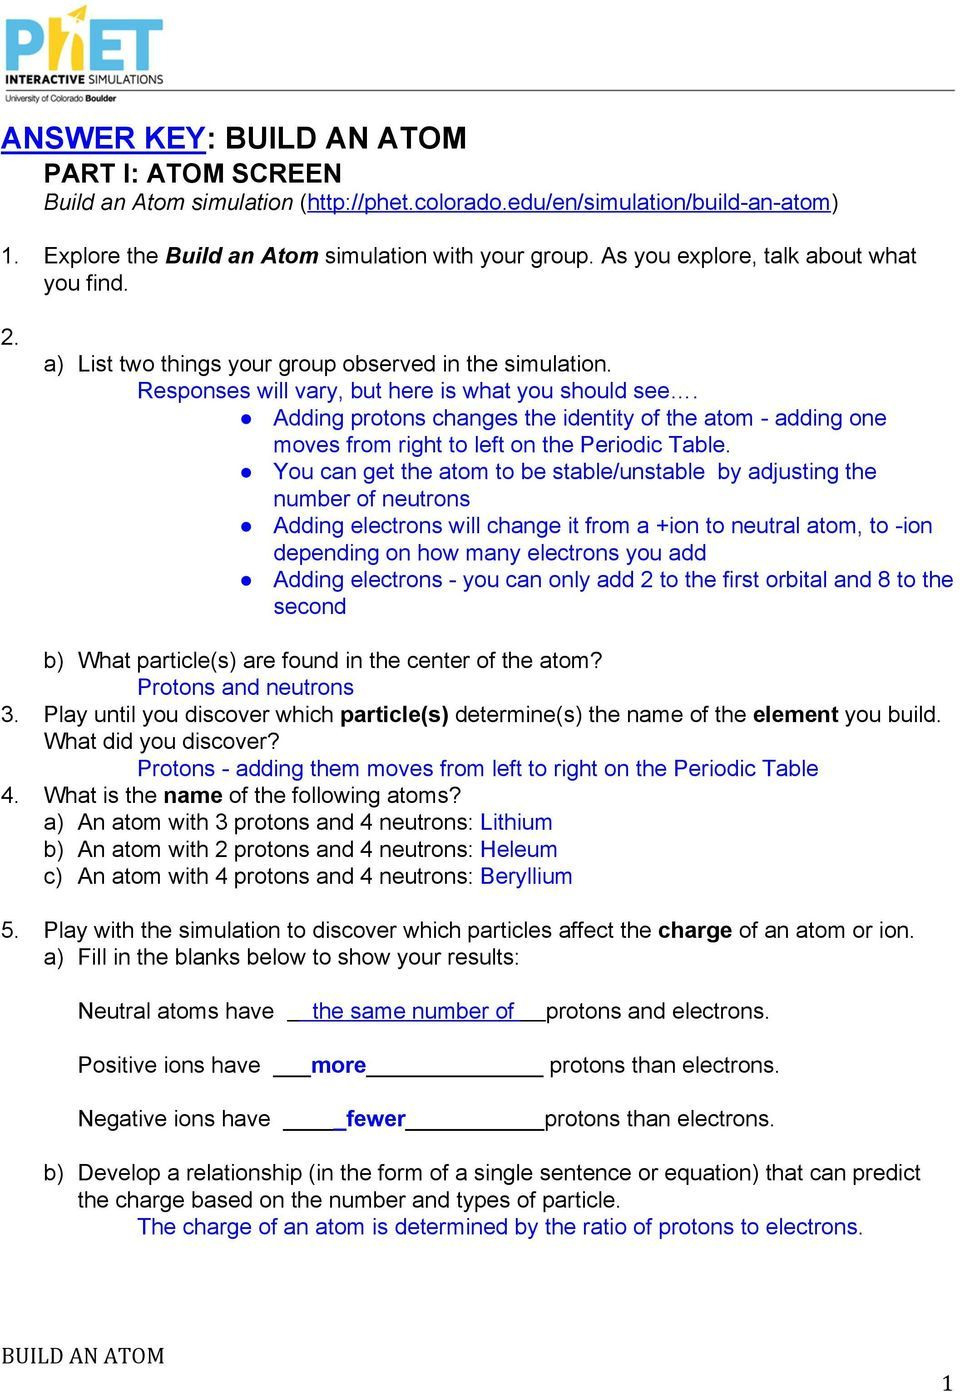 Key Terms Electricity Worksheet Answers Chapter 7